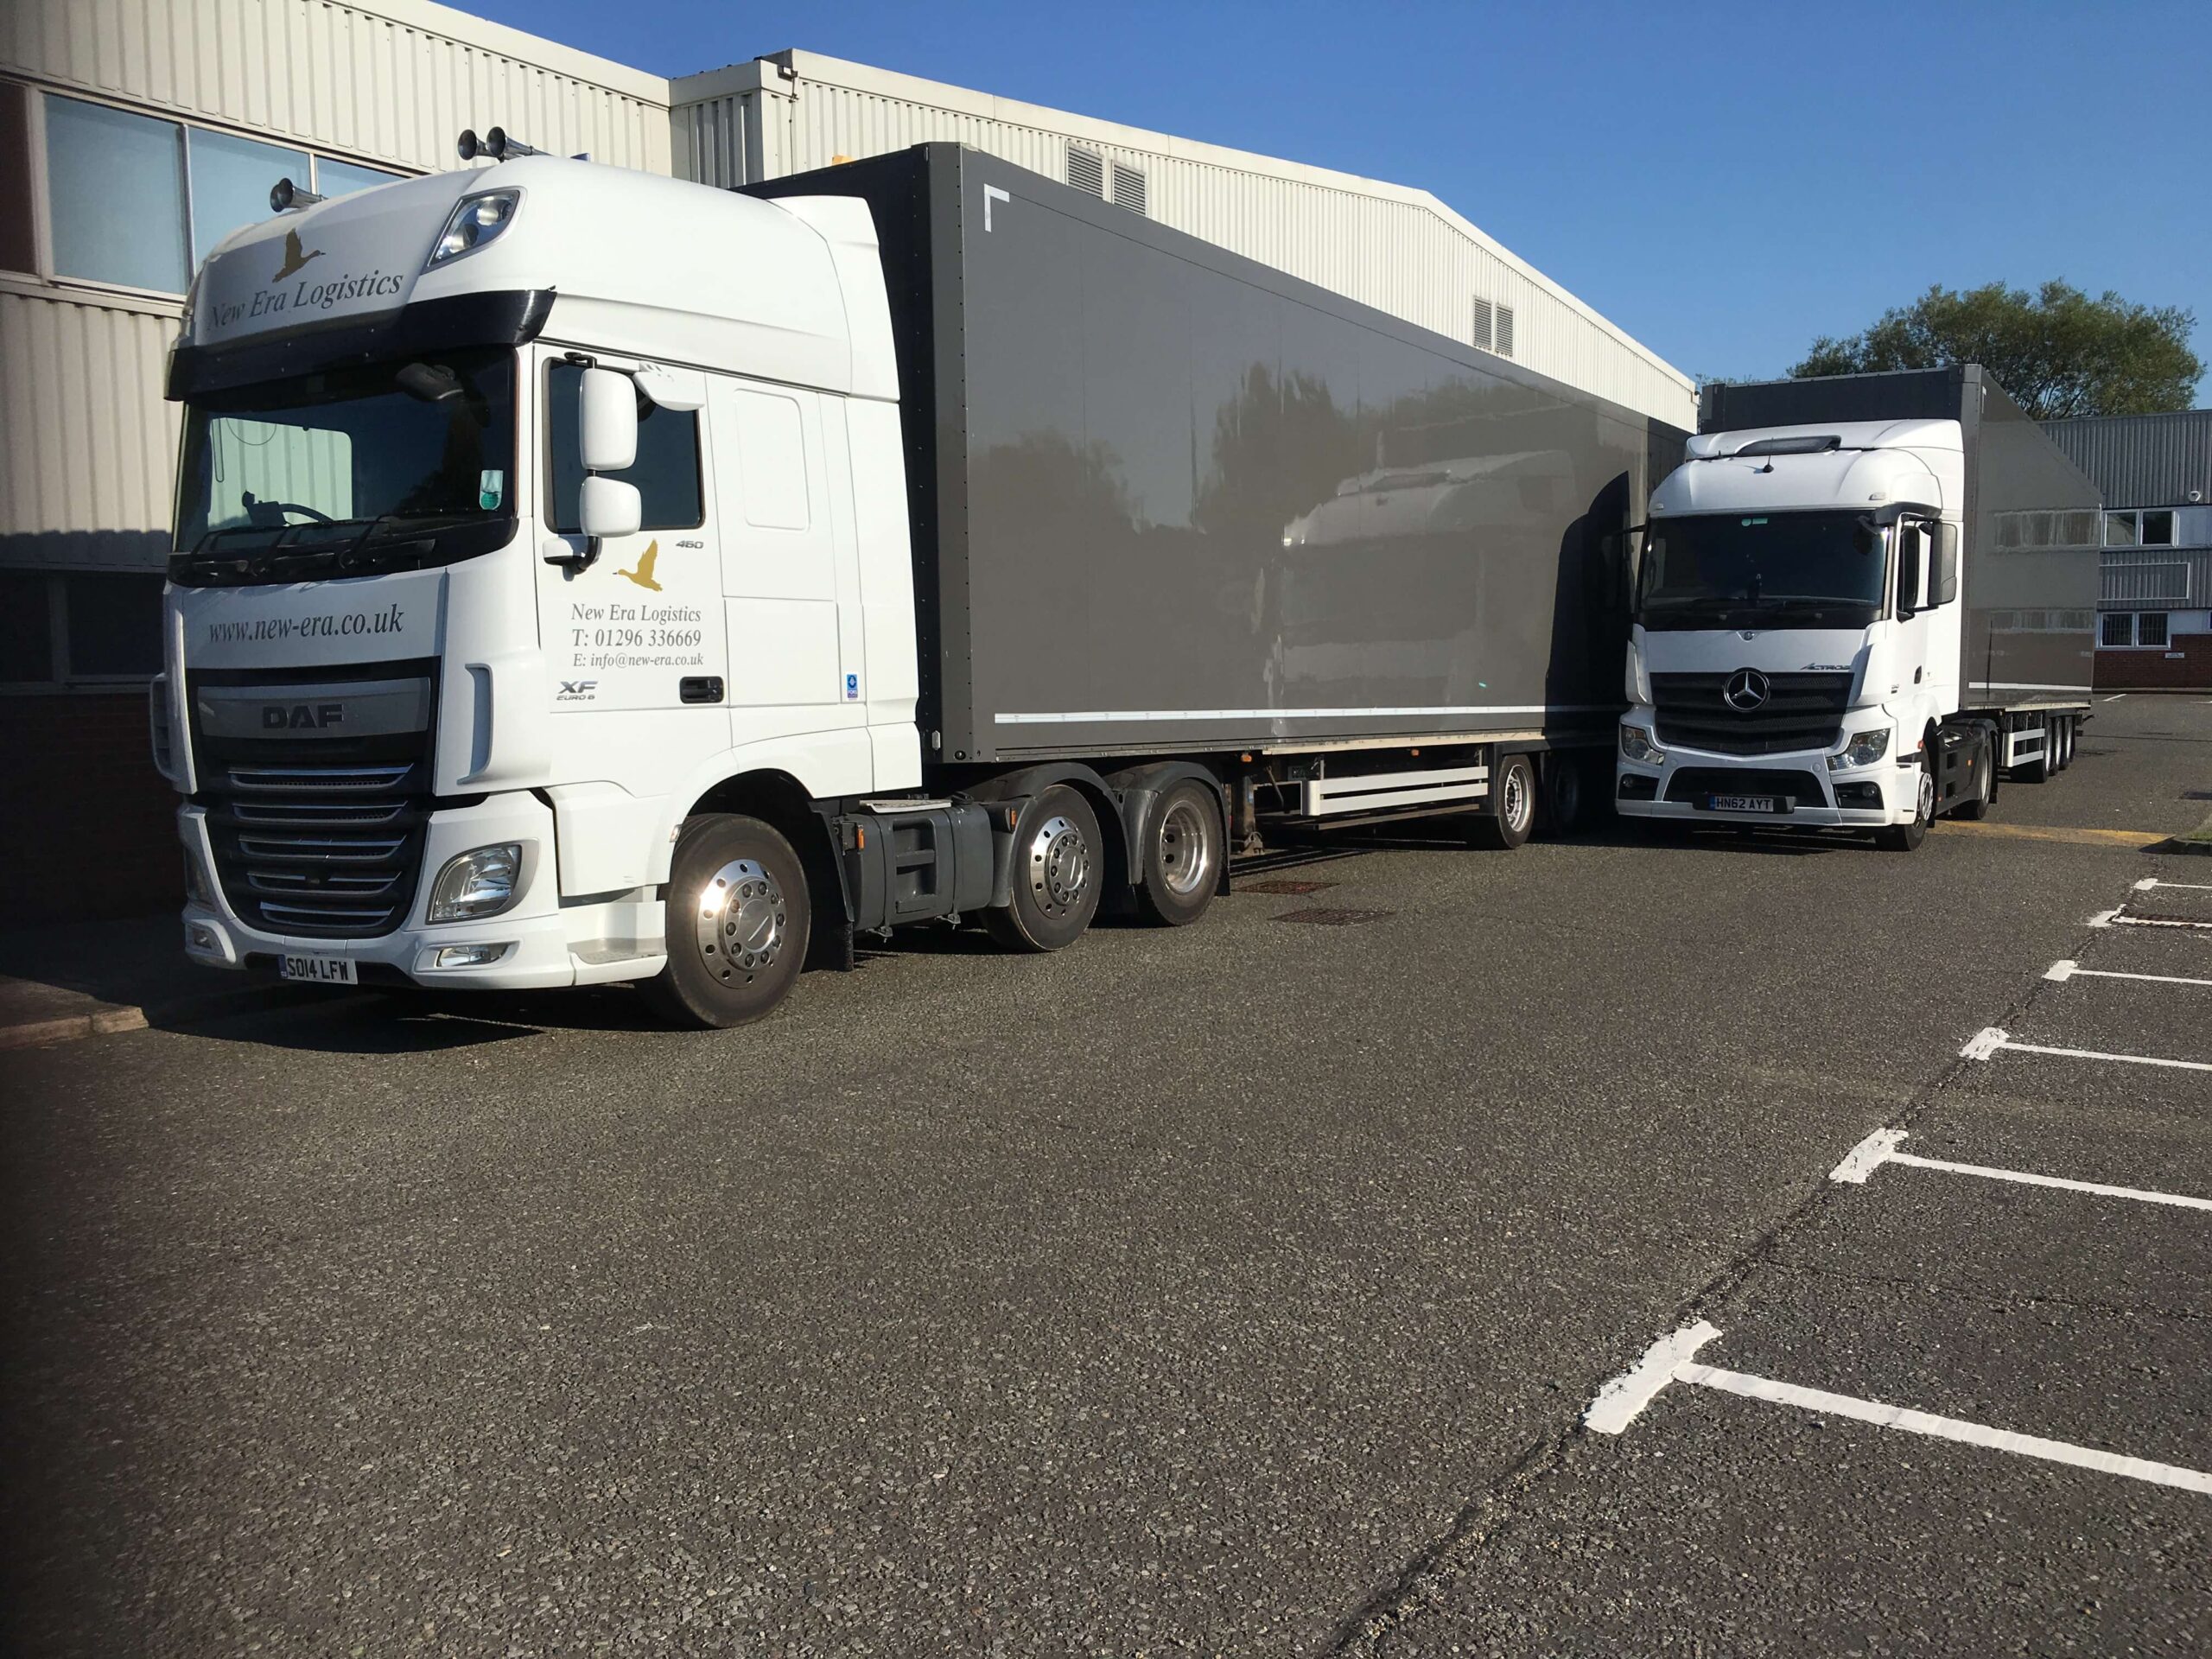 Two grey event trucks outside a warehouse